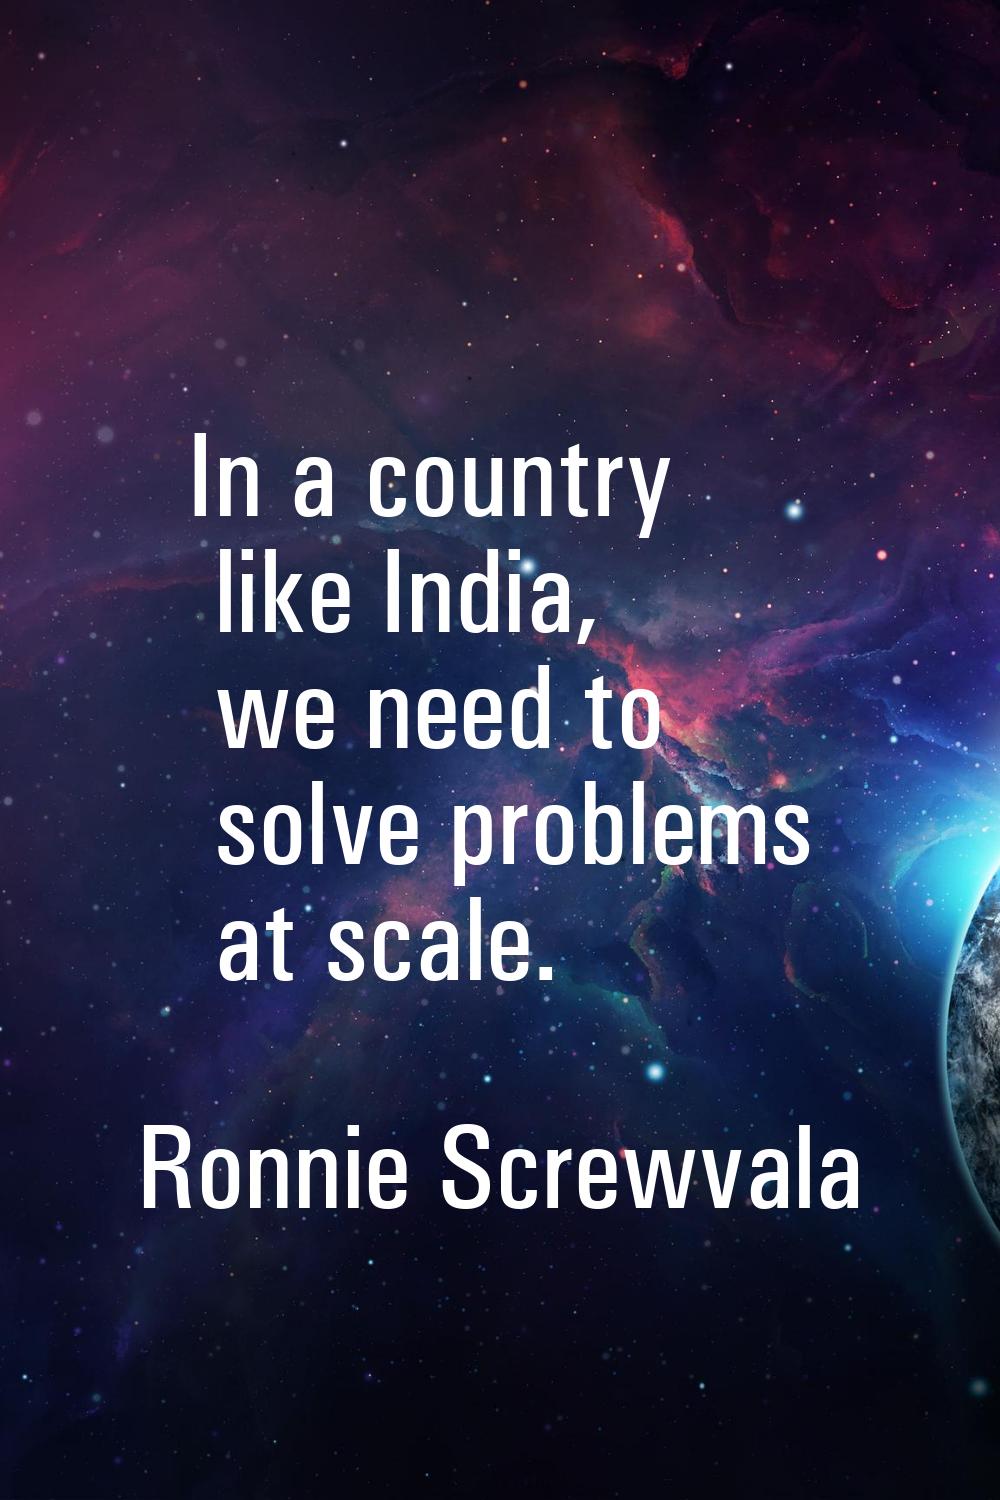 In a country like India, we need to solve problems at scale.